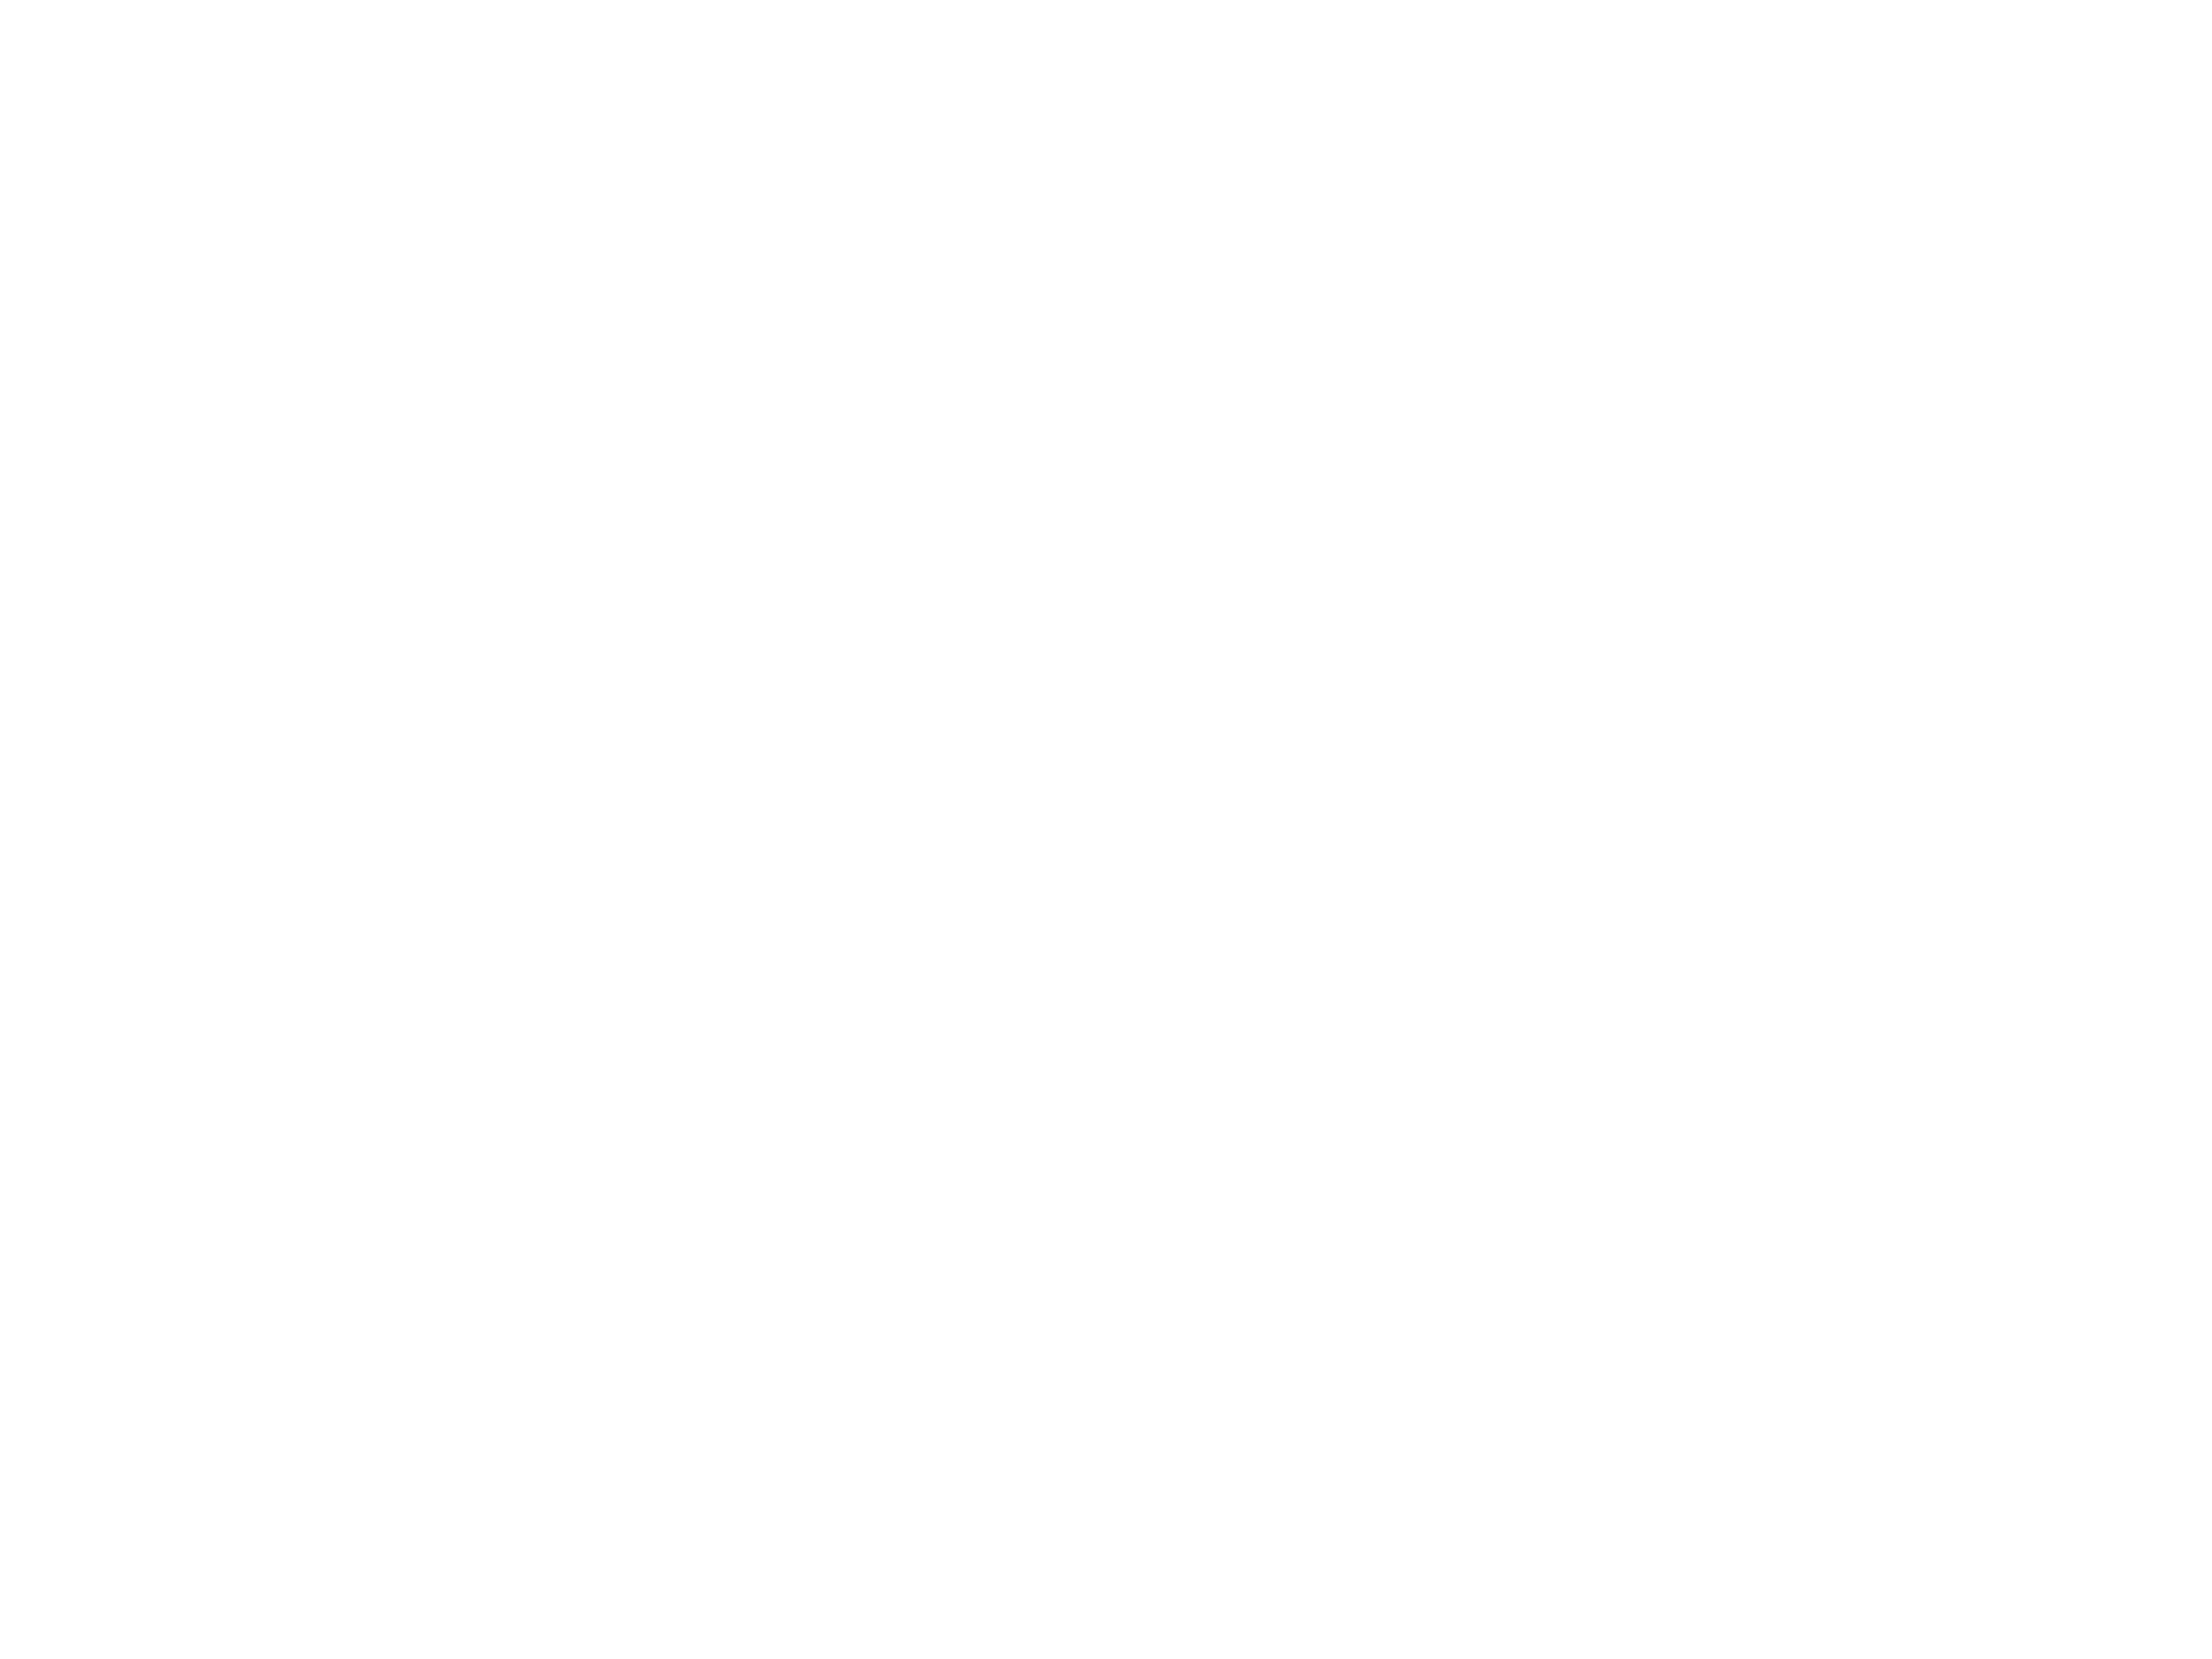 You! When you invest in our crowdfund